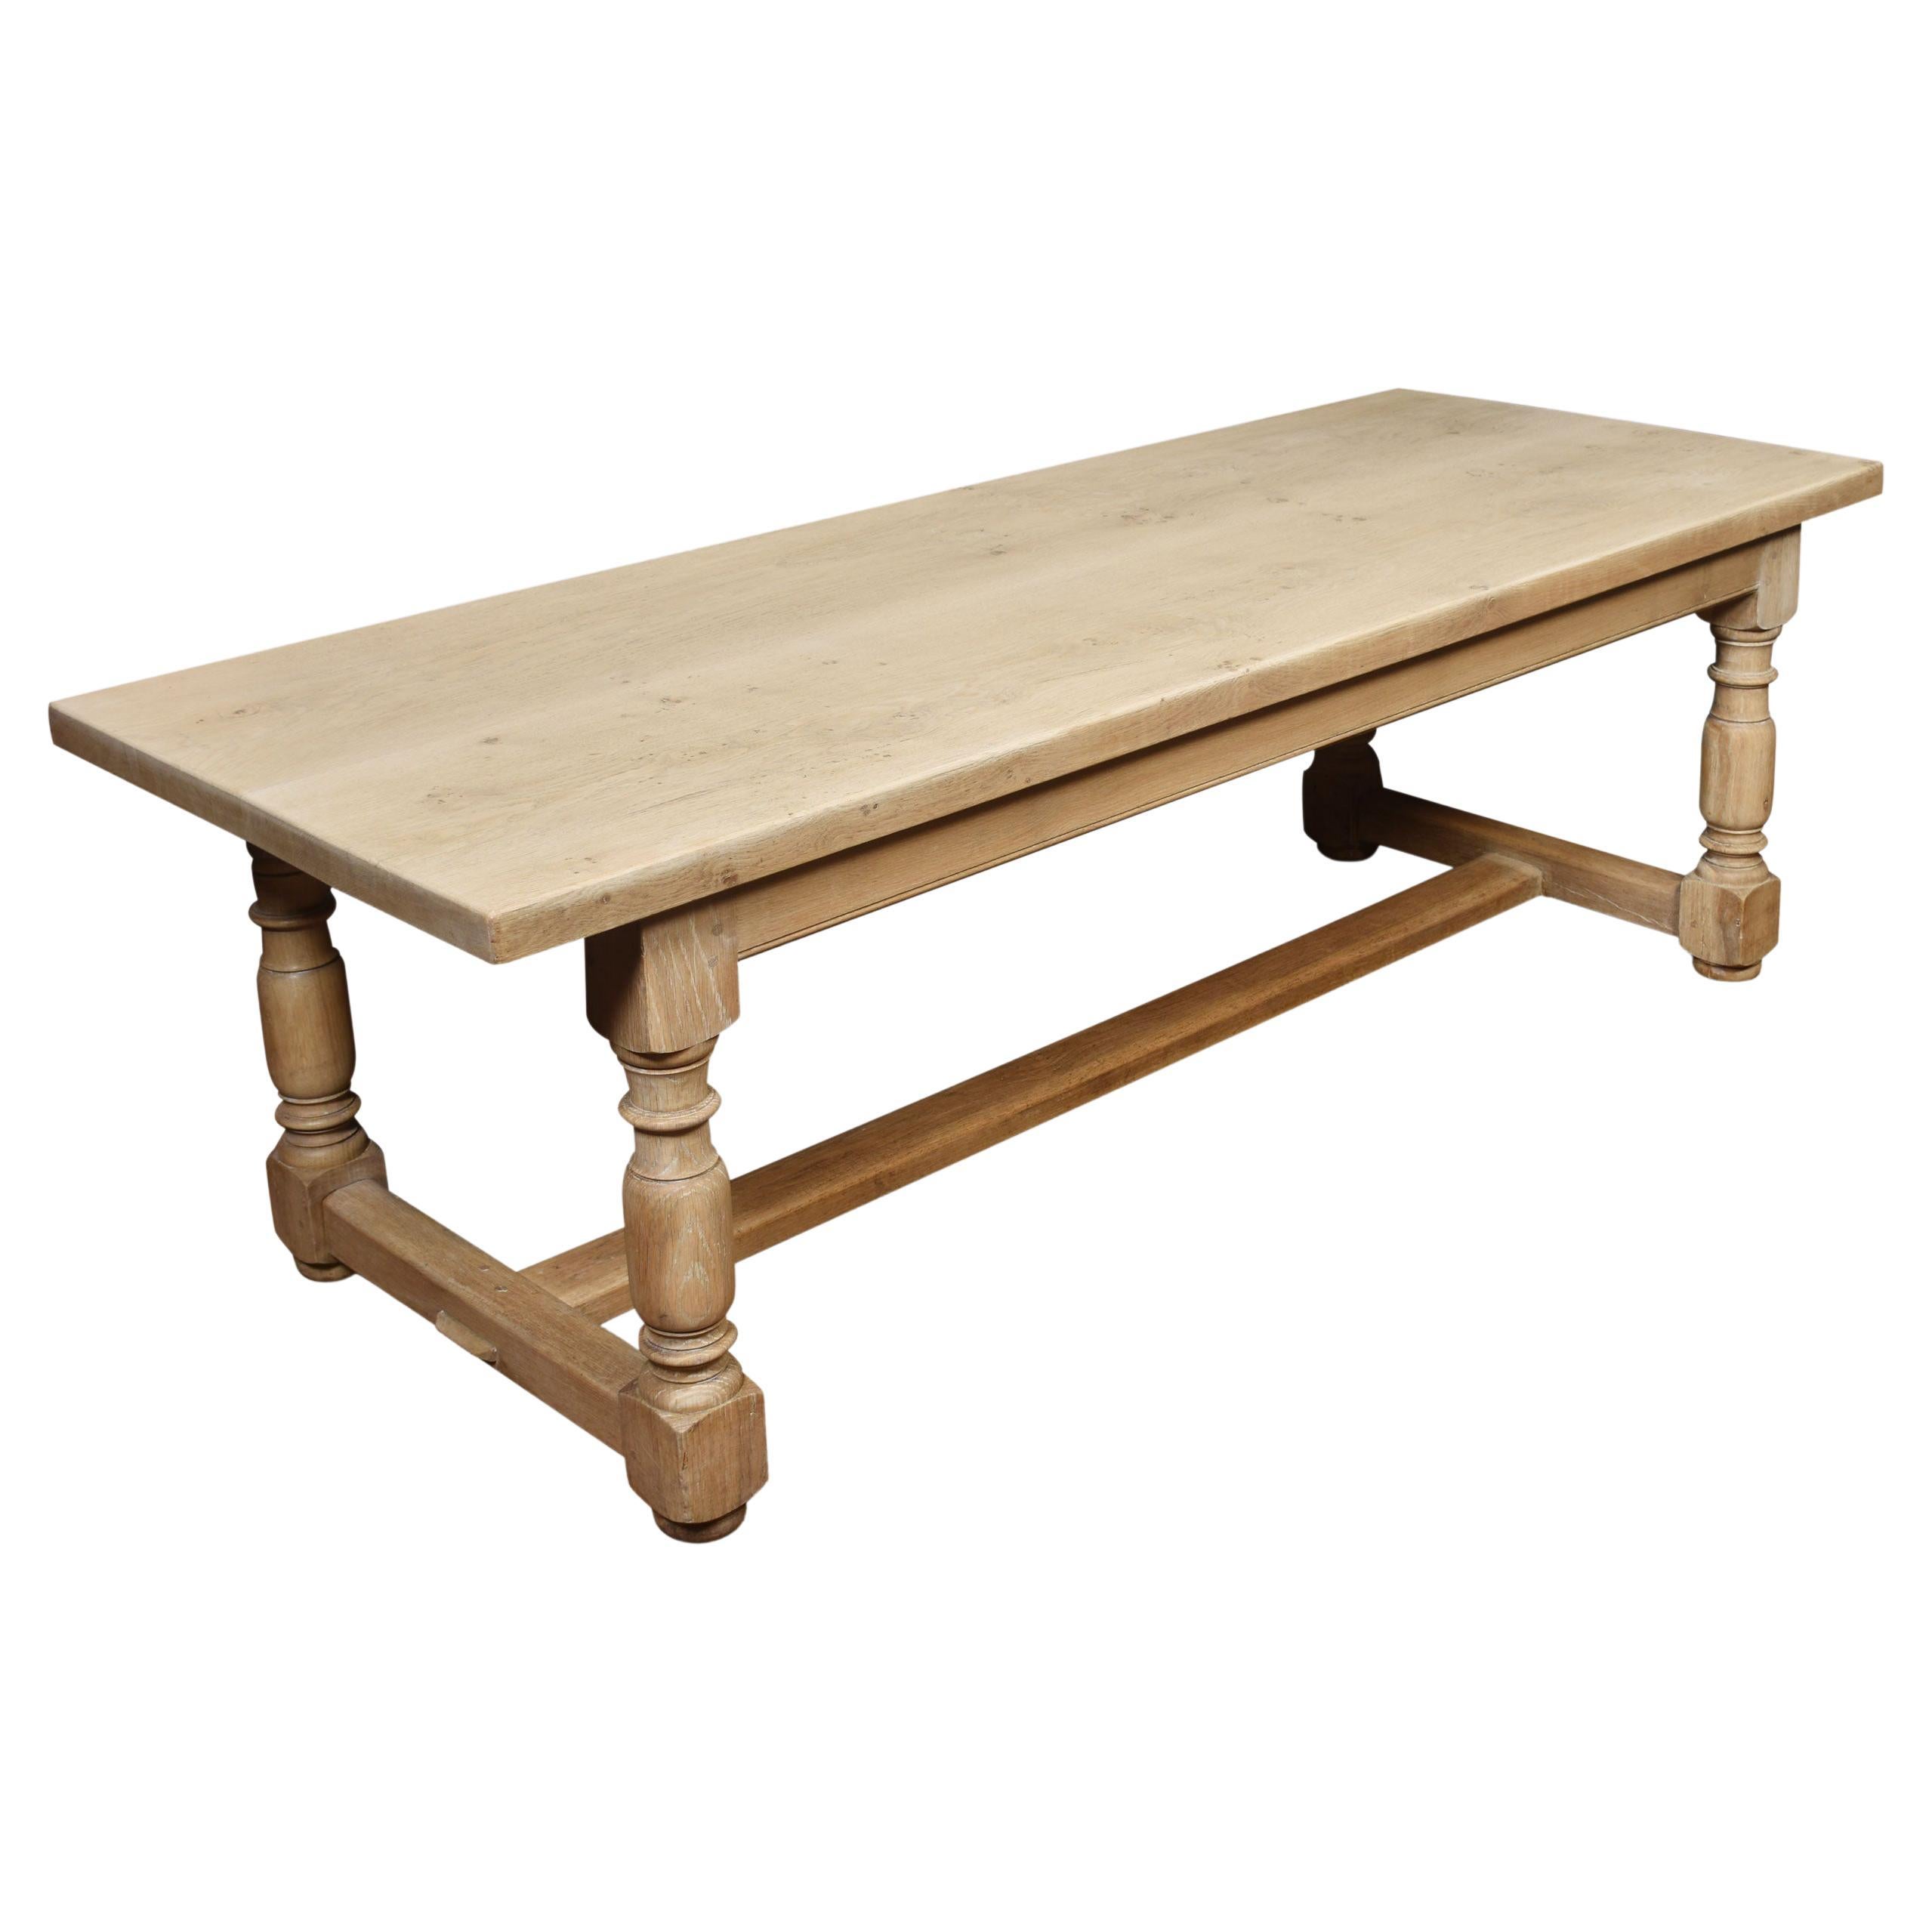 Bleached Oak Plank Top Refectory Table